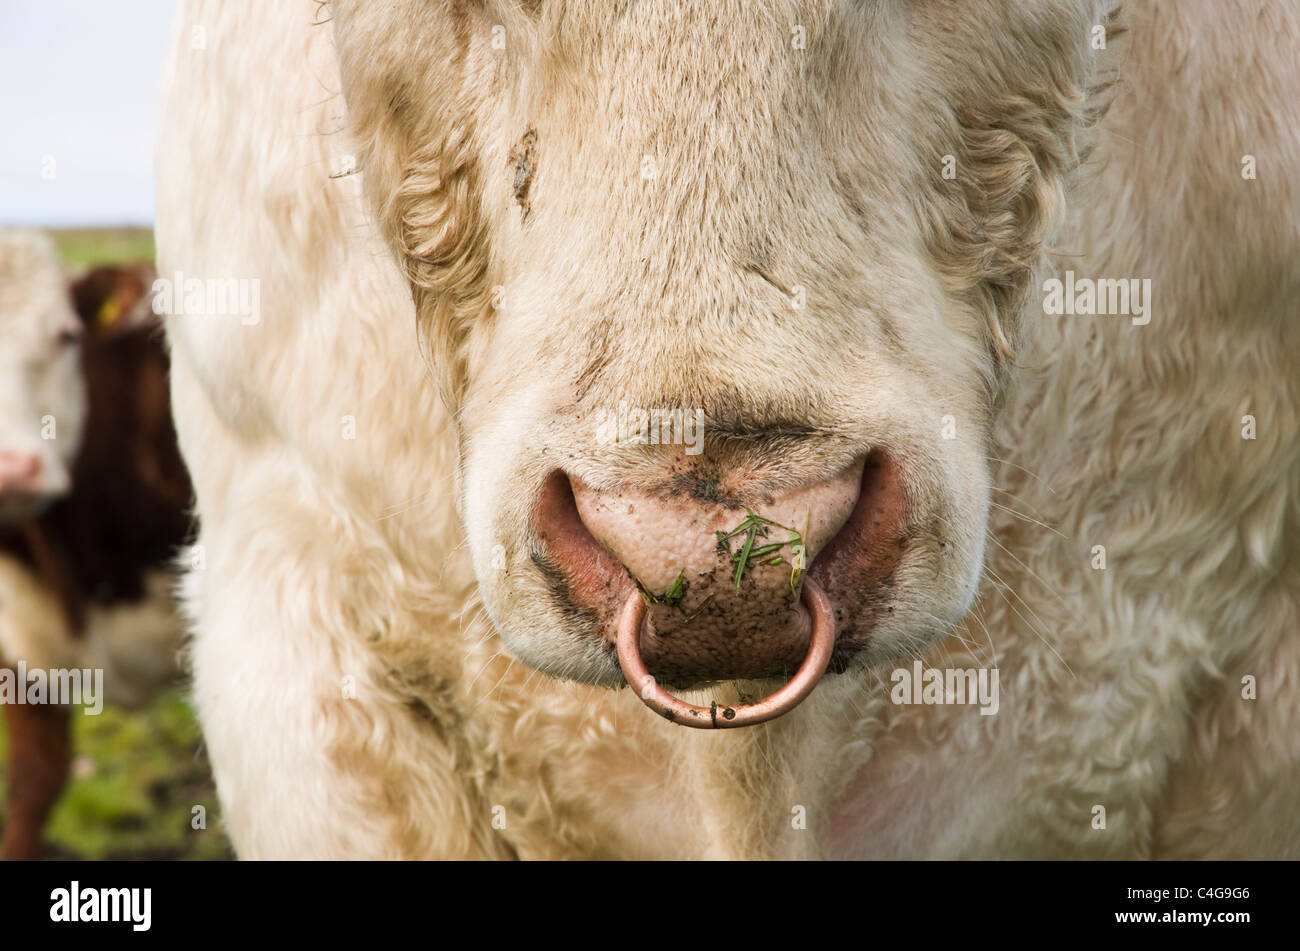 close up of a bull with a ring through its nose scotland uk britain C4G9G6